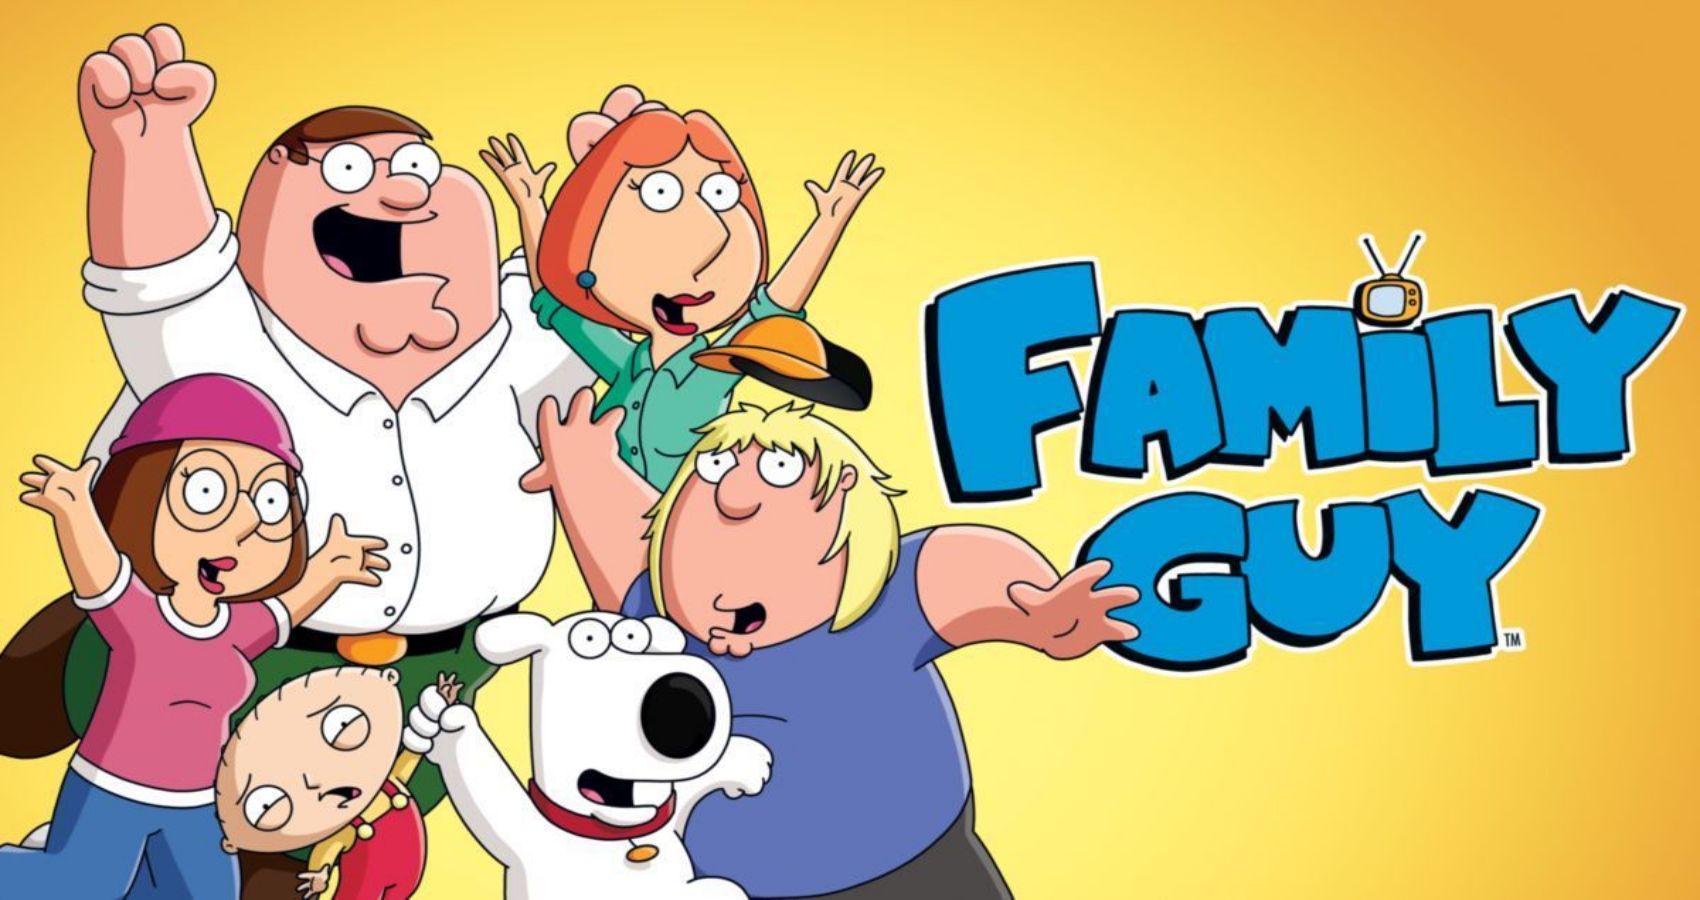 The Family Guy gang haphazardly poses for their tv title